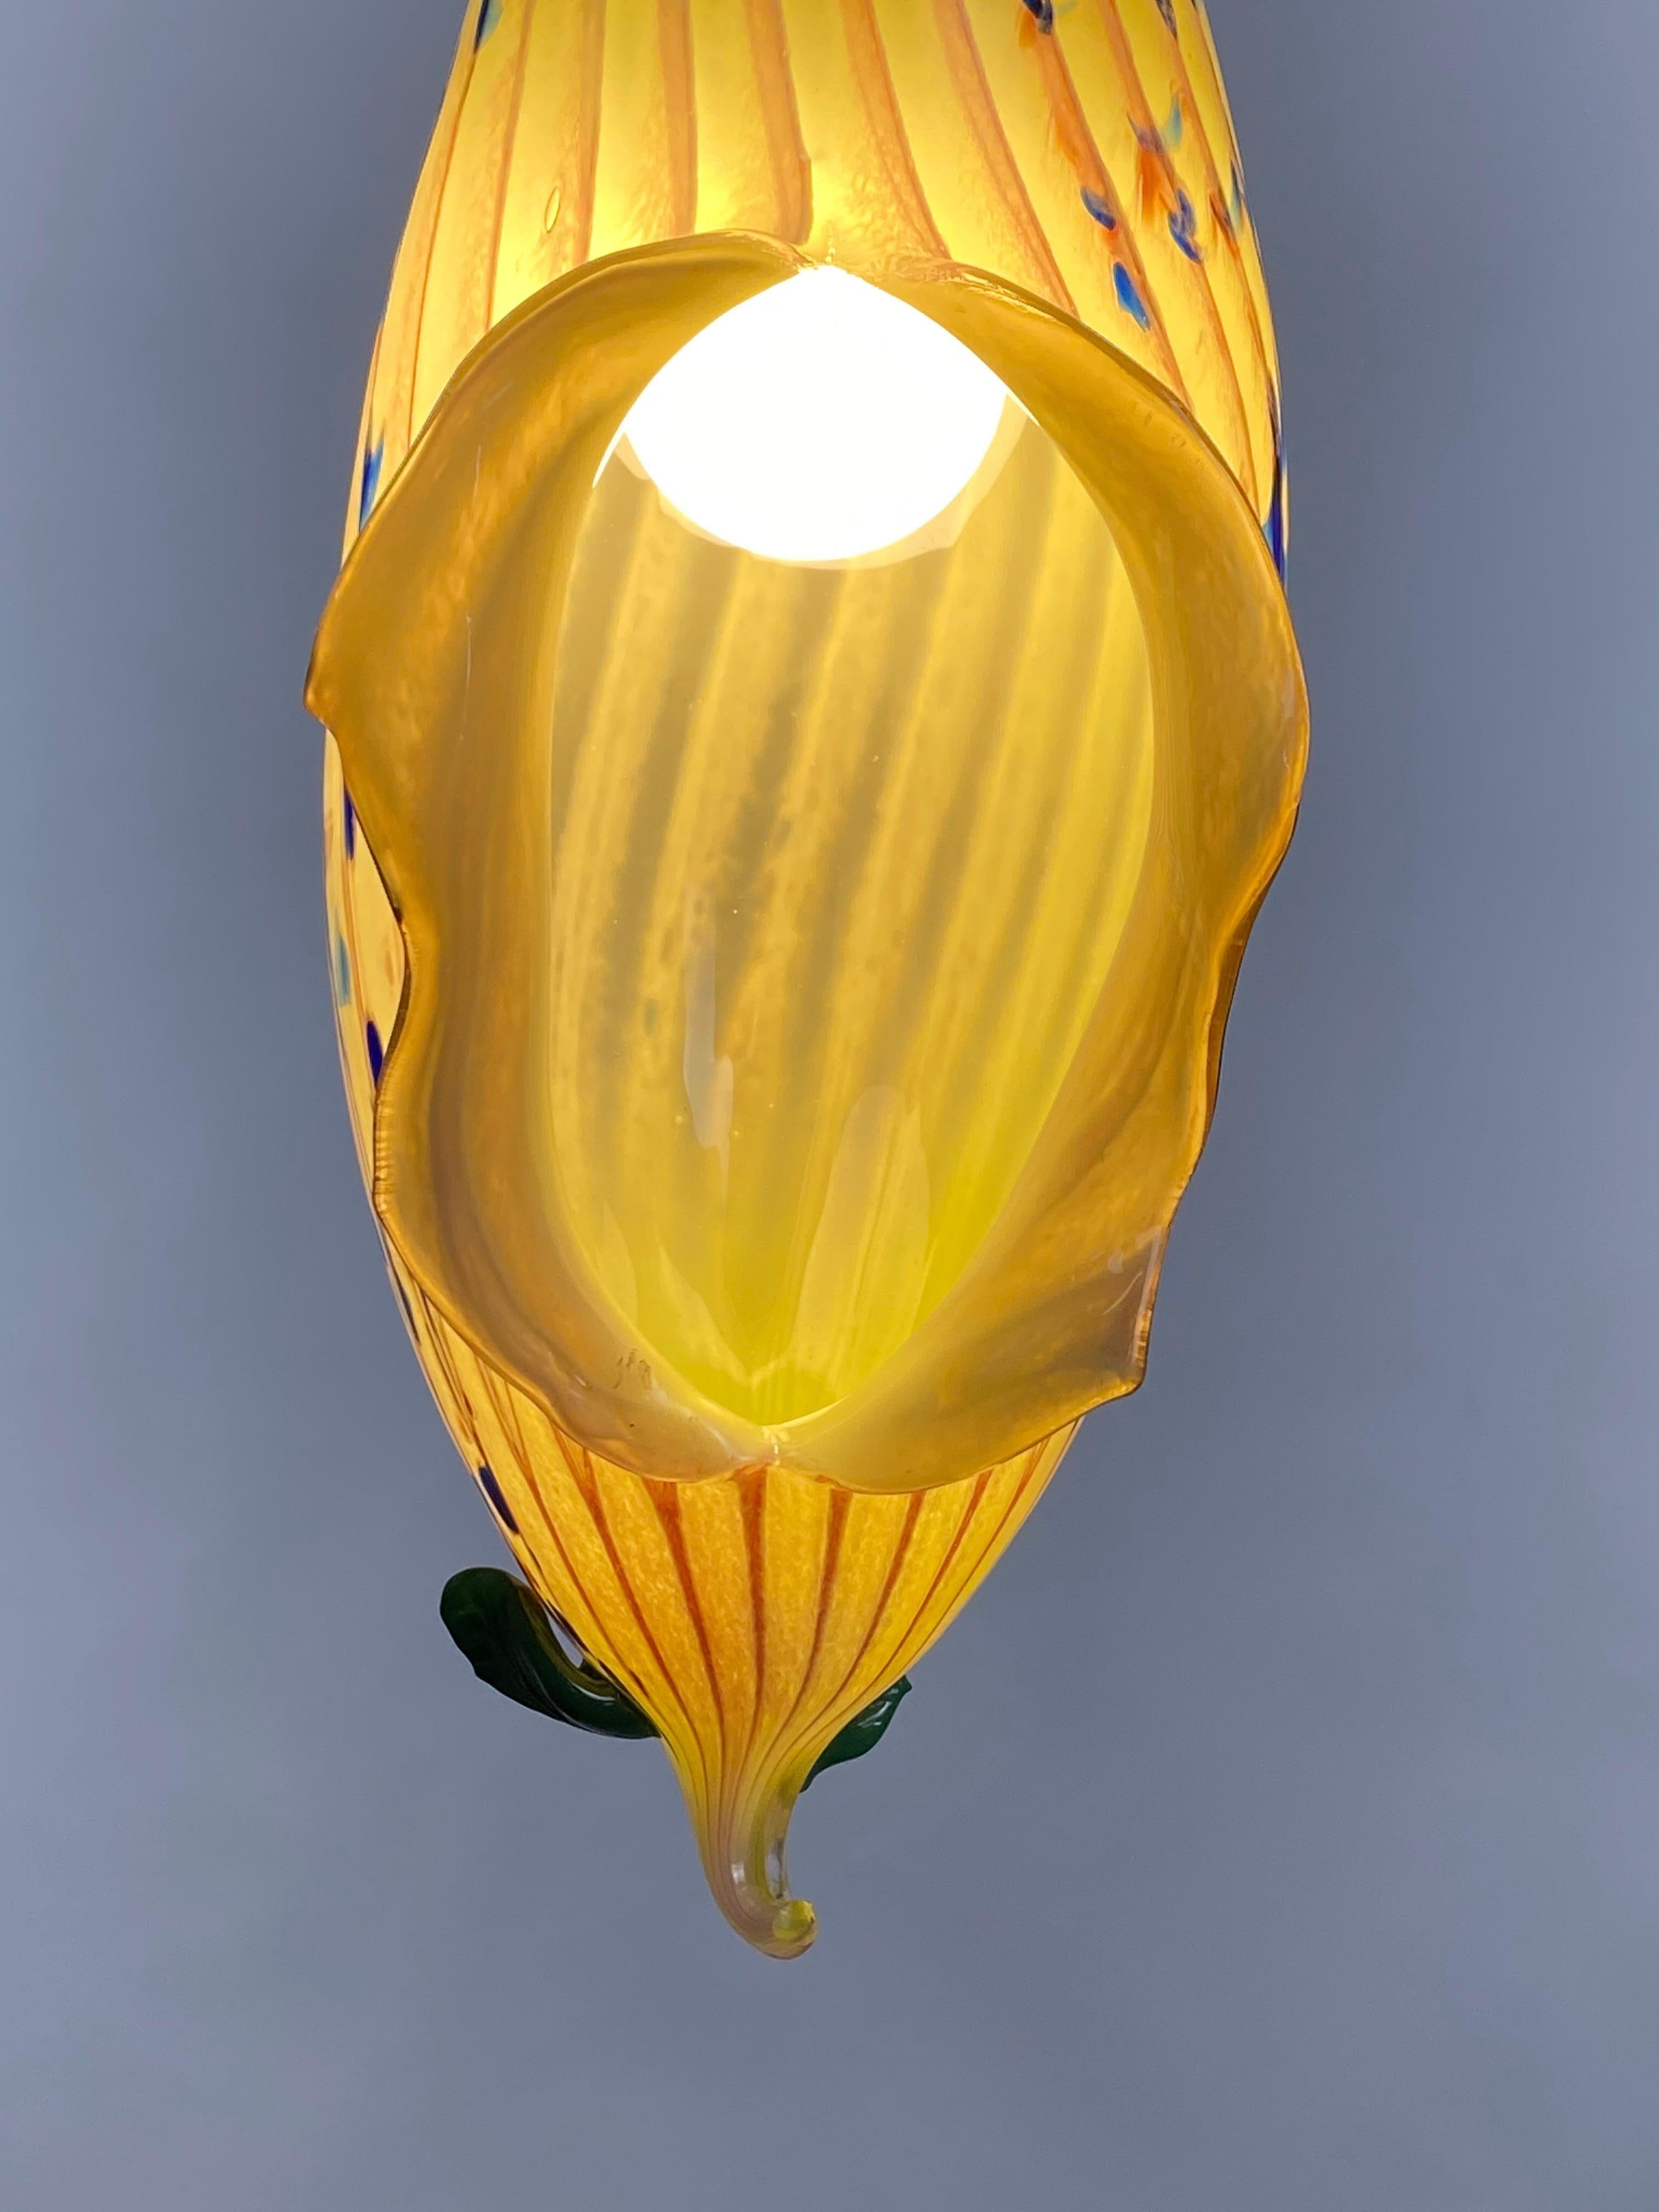 Blown Glass Yellow and Lamp Pendent Light, 21st Century by Mattia Biagi For Sale 8